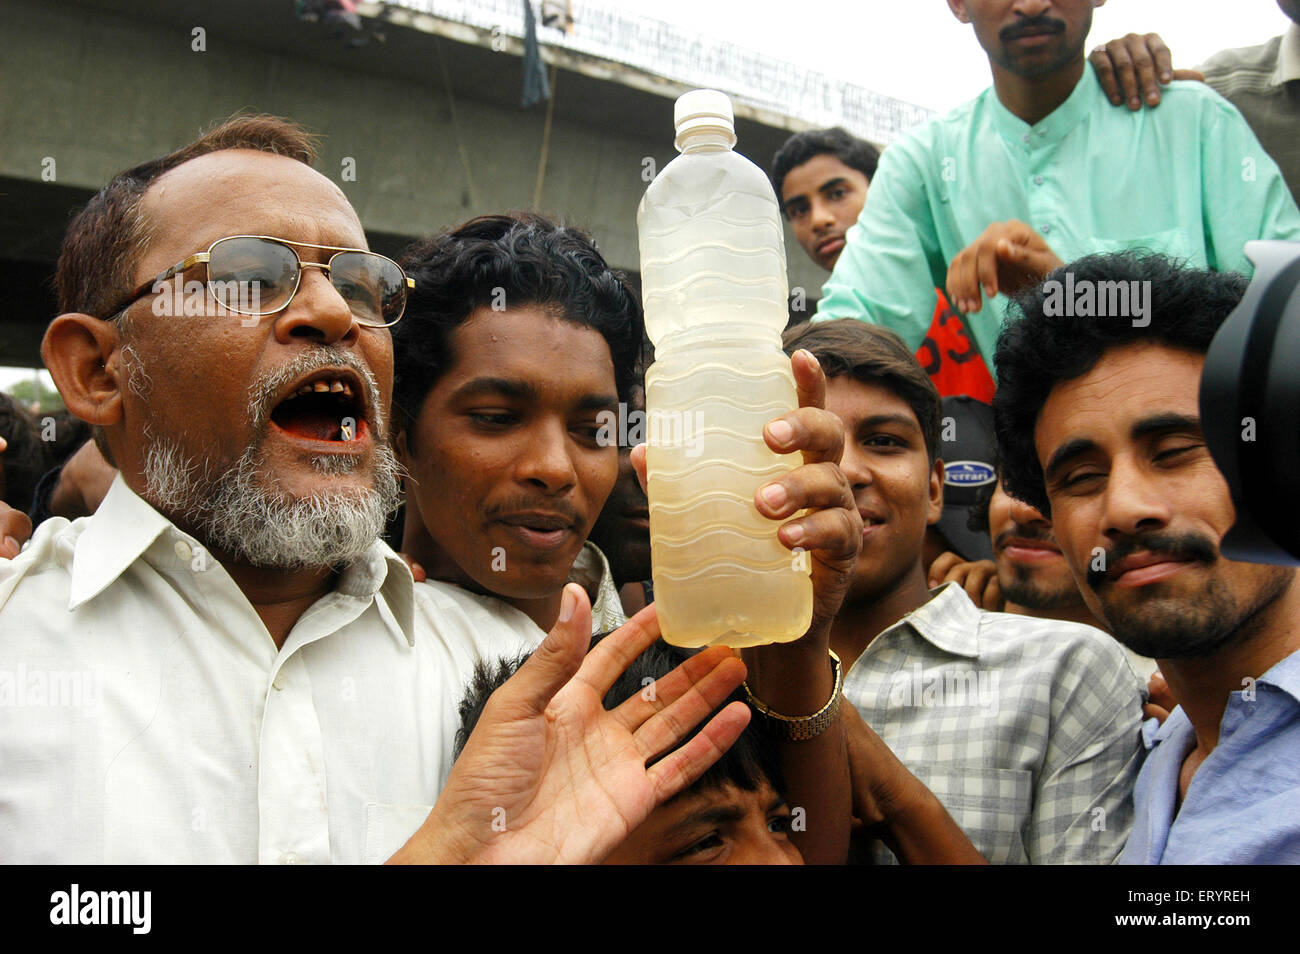 People showing contaminated dirty filthy drinking water bottle and protesting, Bombay, Mumbai, Maharashtra, India, Asia, Asian, Indian Stock Photo